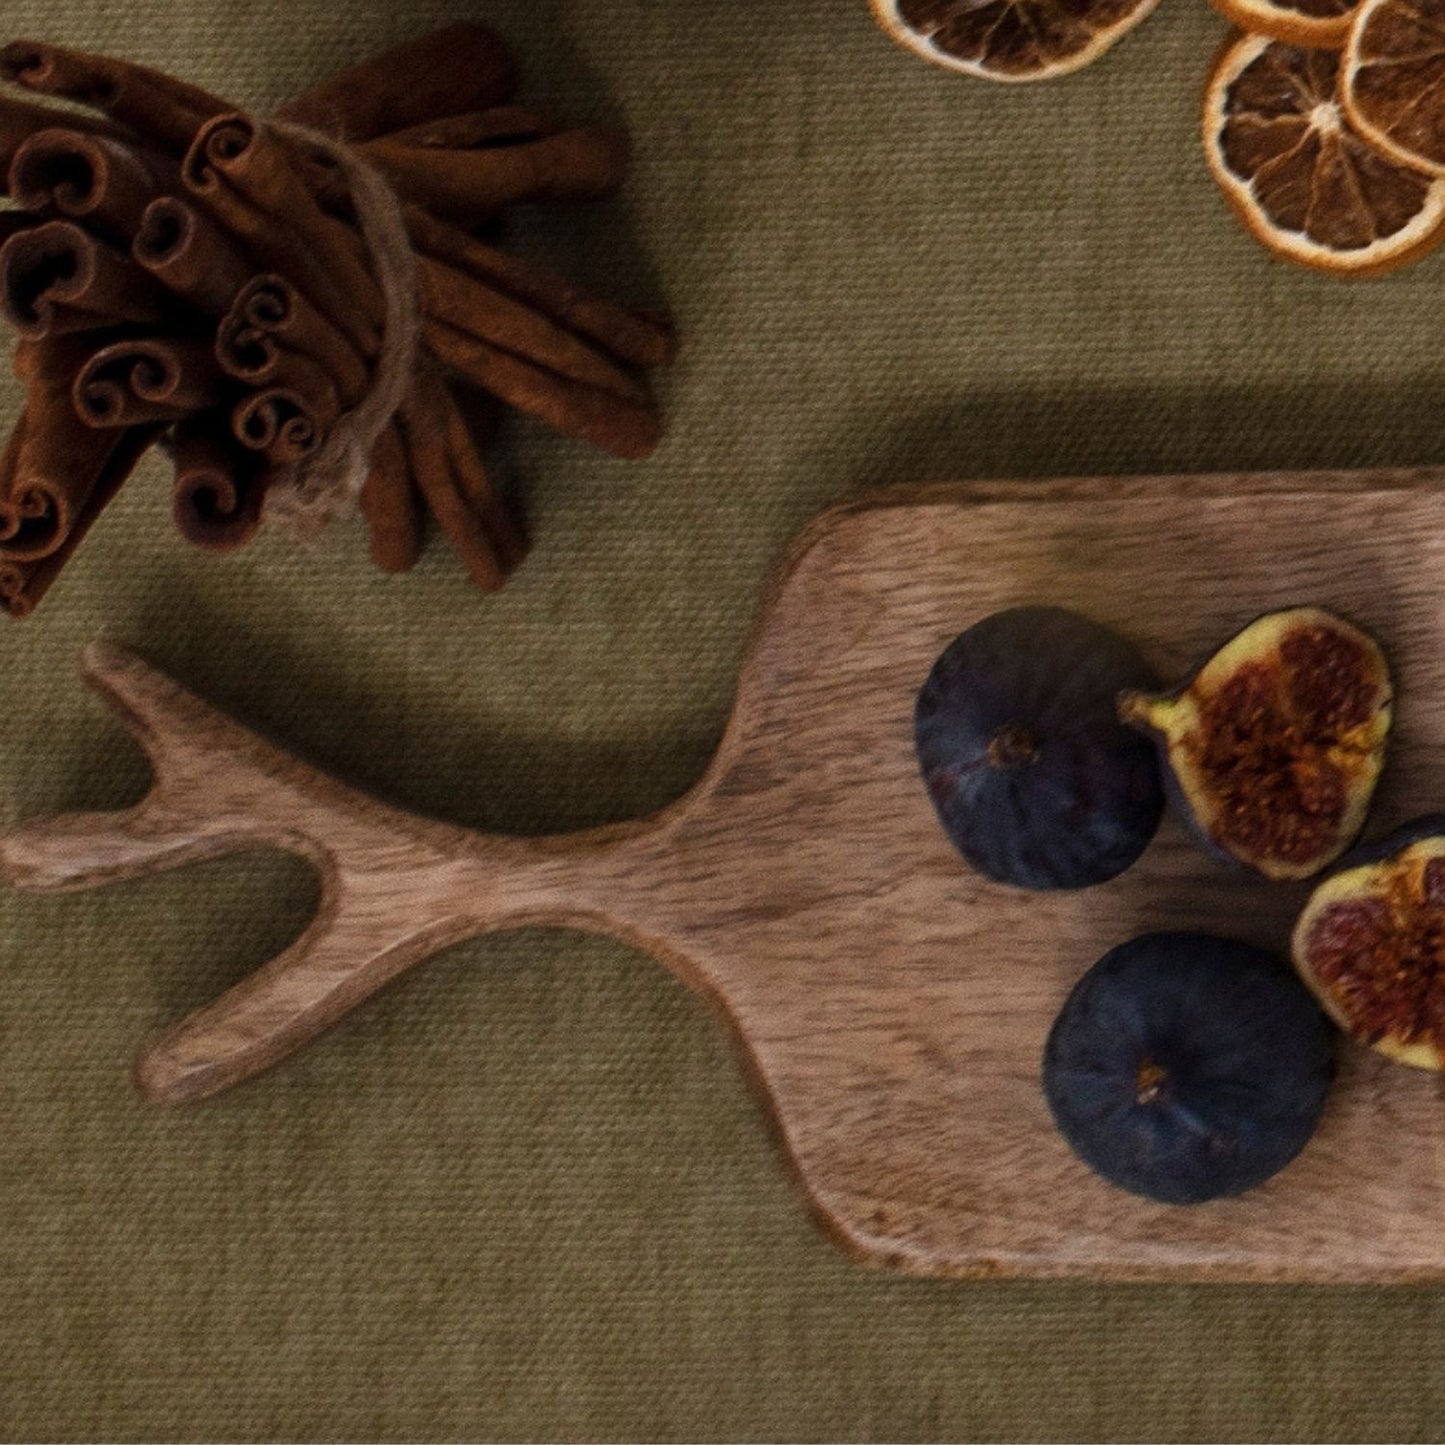 Stag Wooden Chopping Board perfect for a chacuterie board and a Christmas gift